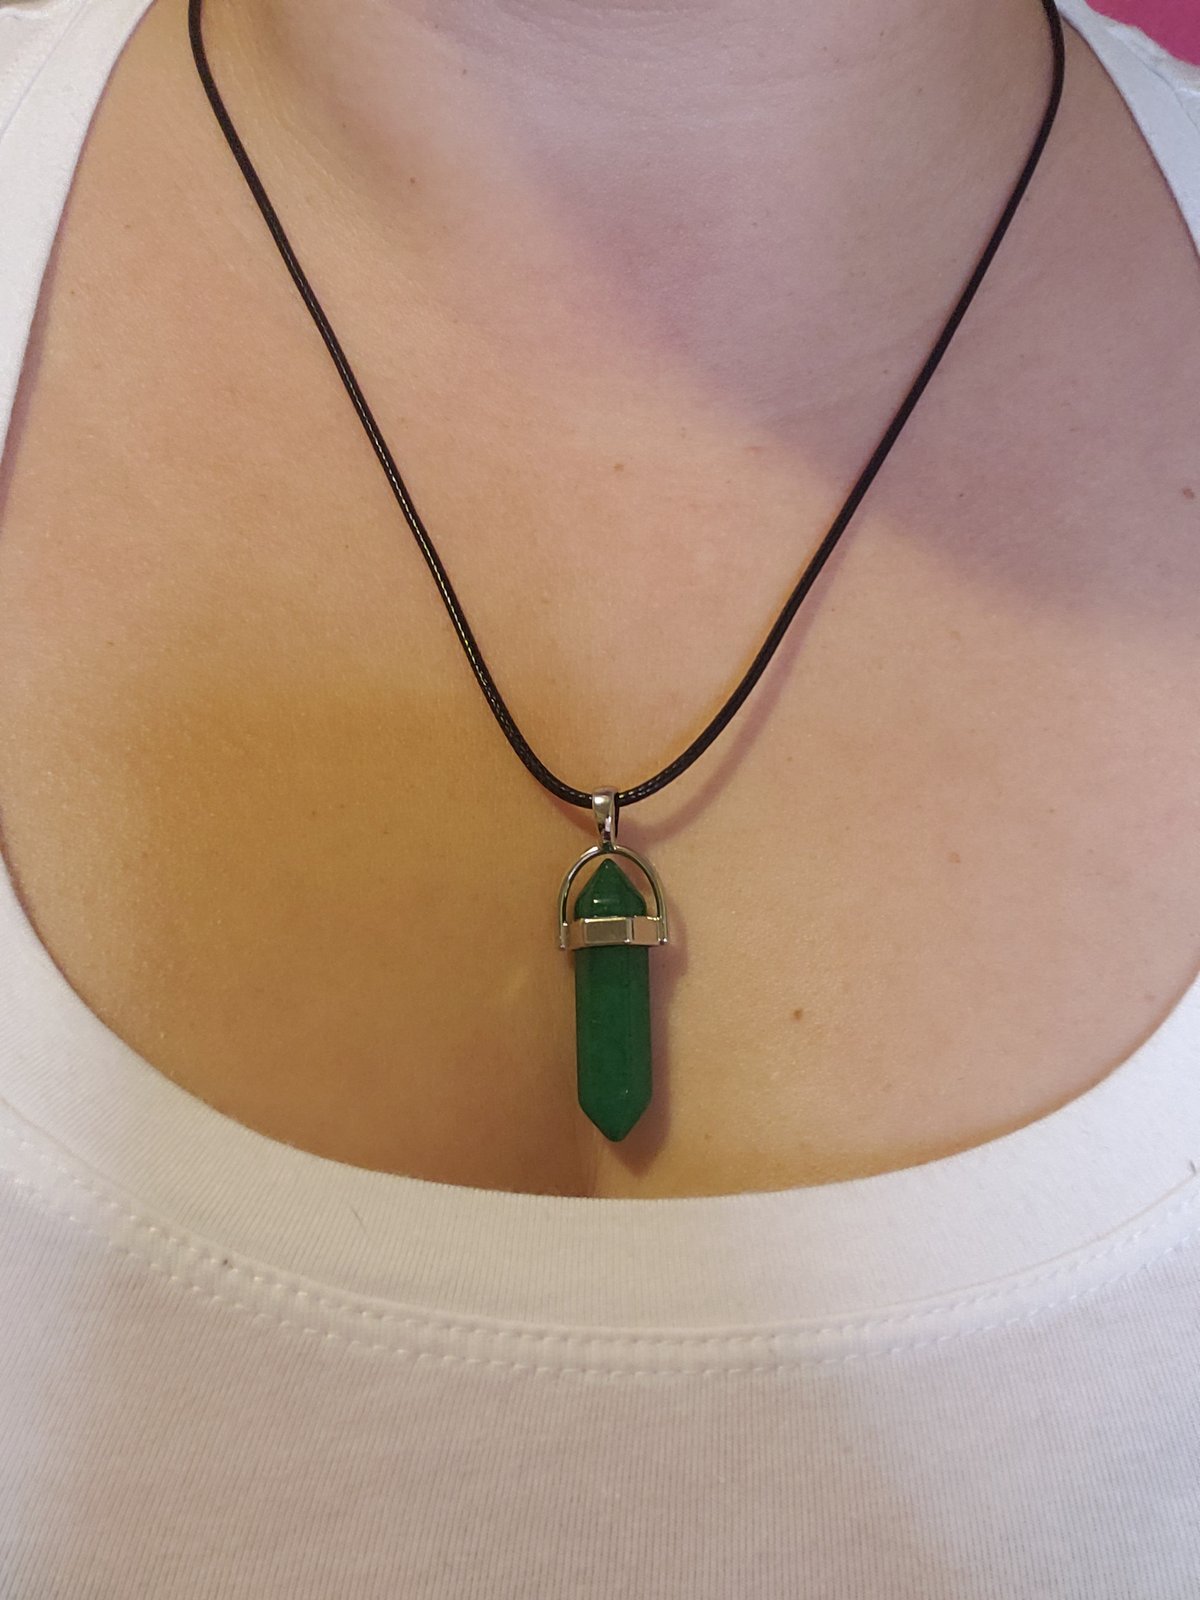 Sea Glass Necklace - Olive Green and Jade Cryst... - Folksy